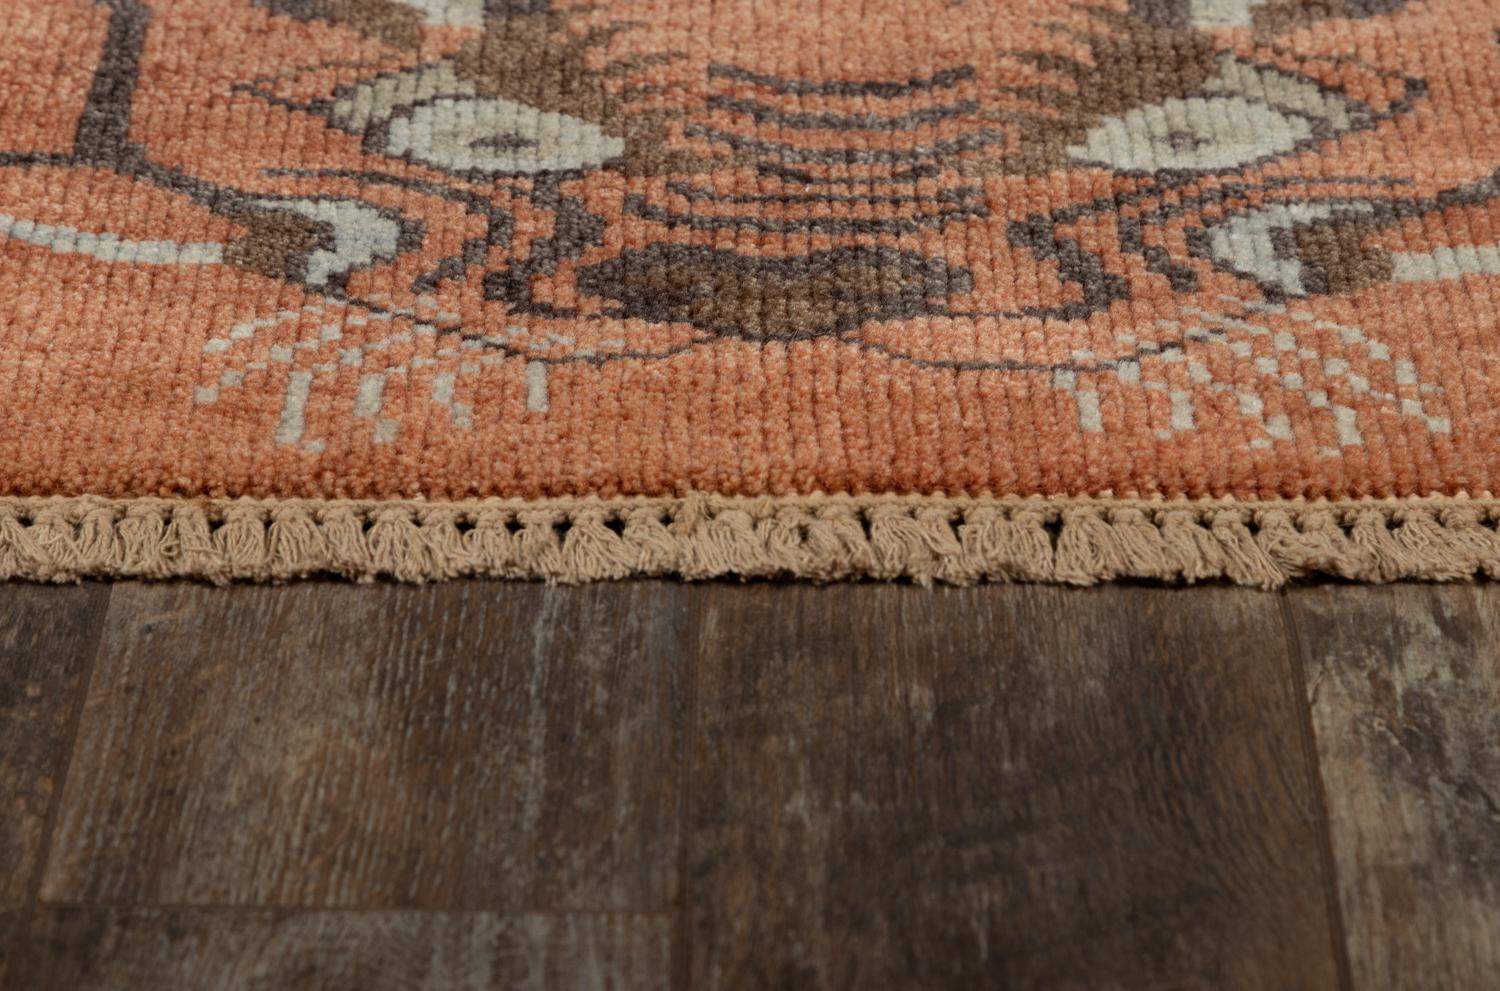 Hand-Woven “Kouang Tiala” Bespoke, Handknotted Rug by Christiane Lemieux For Sale